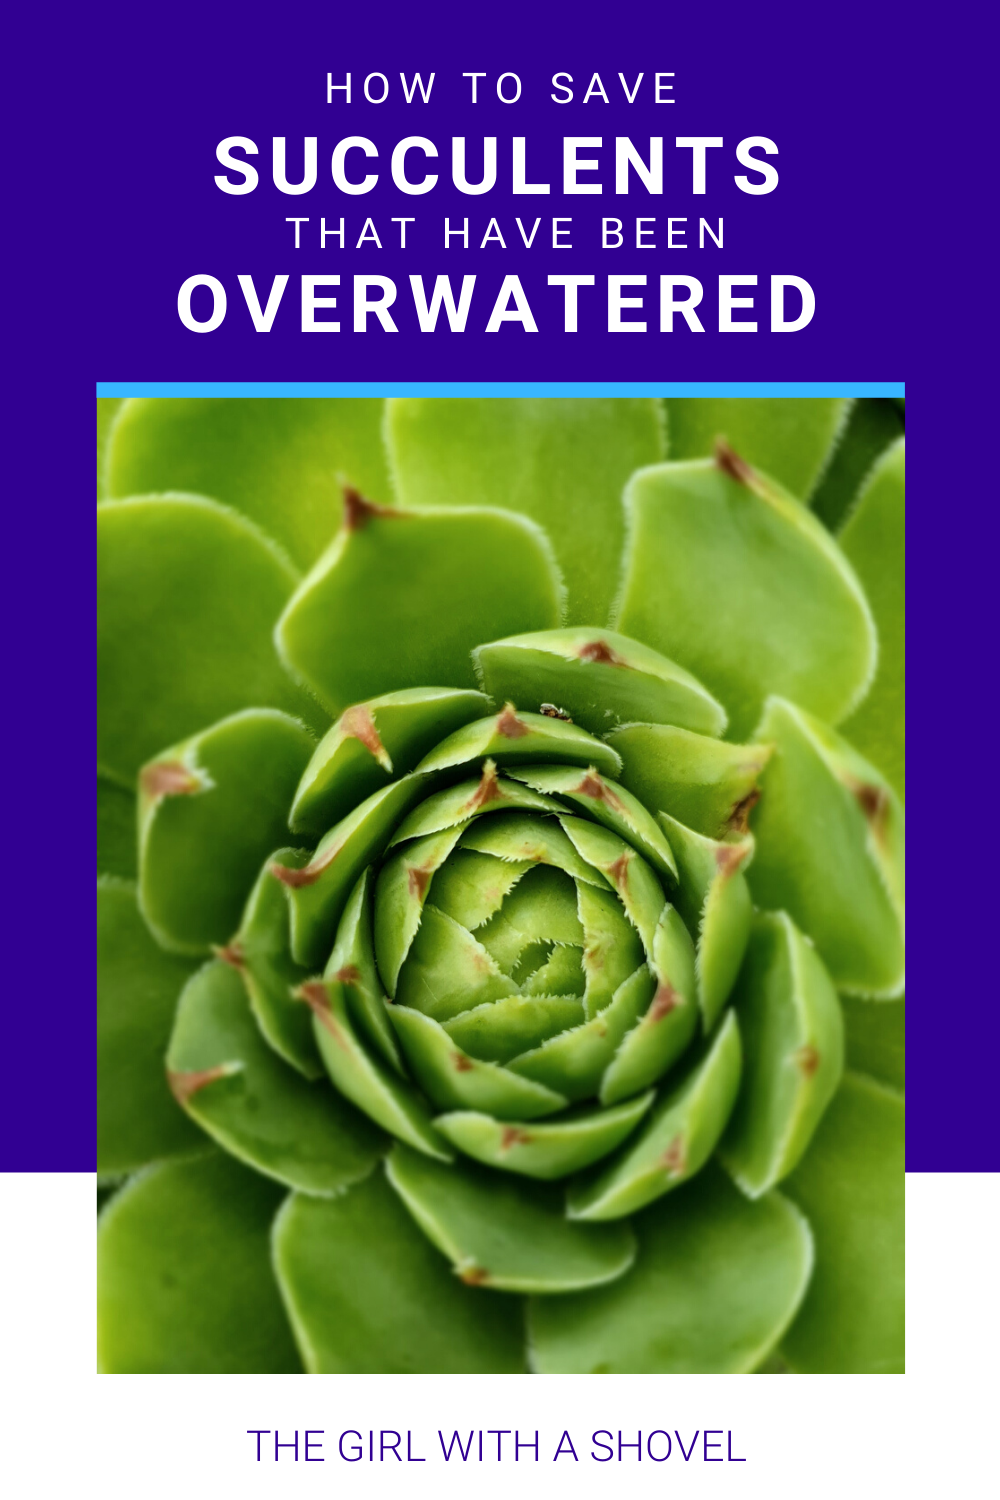 A picture ofa succulent and the title how to save succulents that have been overwatered